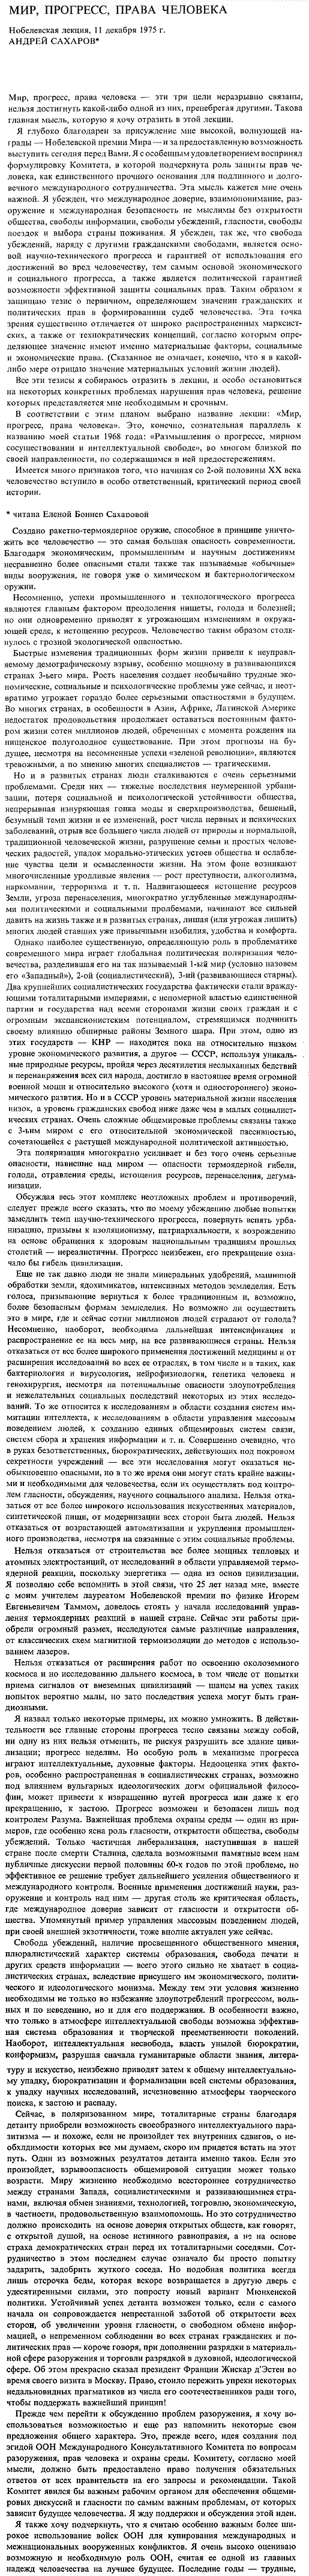 Text in Russian